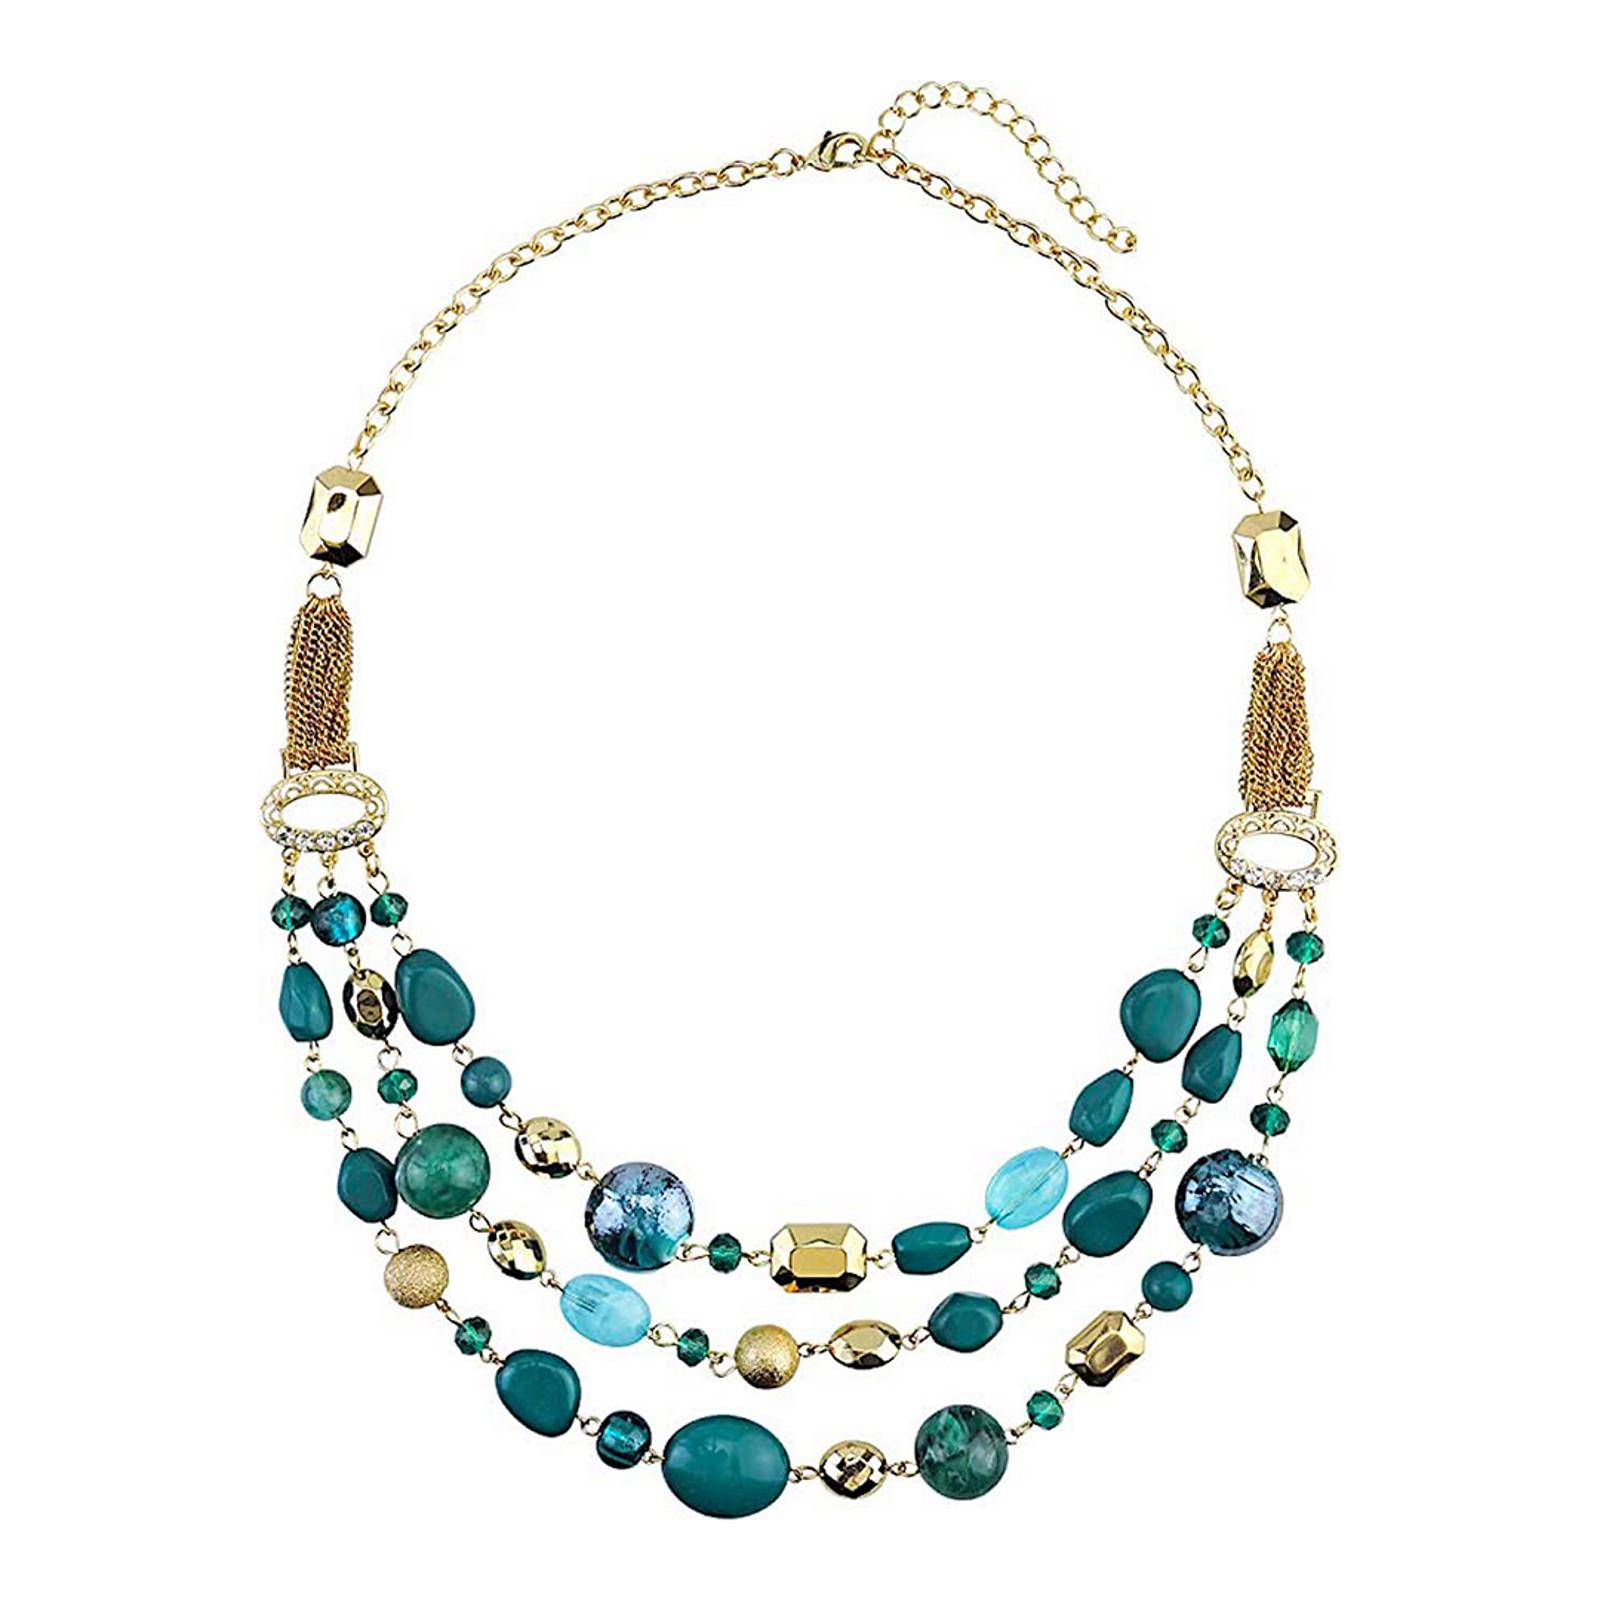 18K Gold Multi Turquoise Statement Necklace - BrandAlley